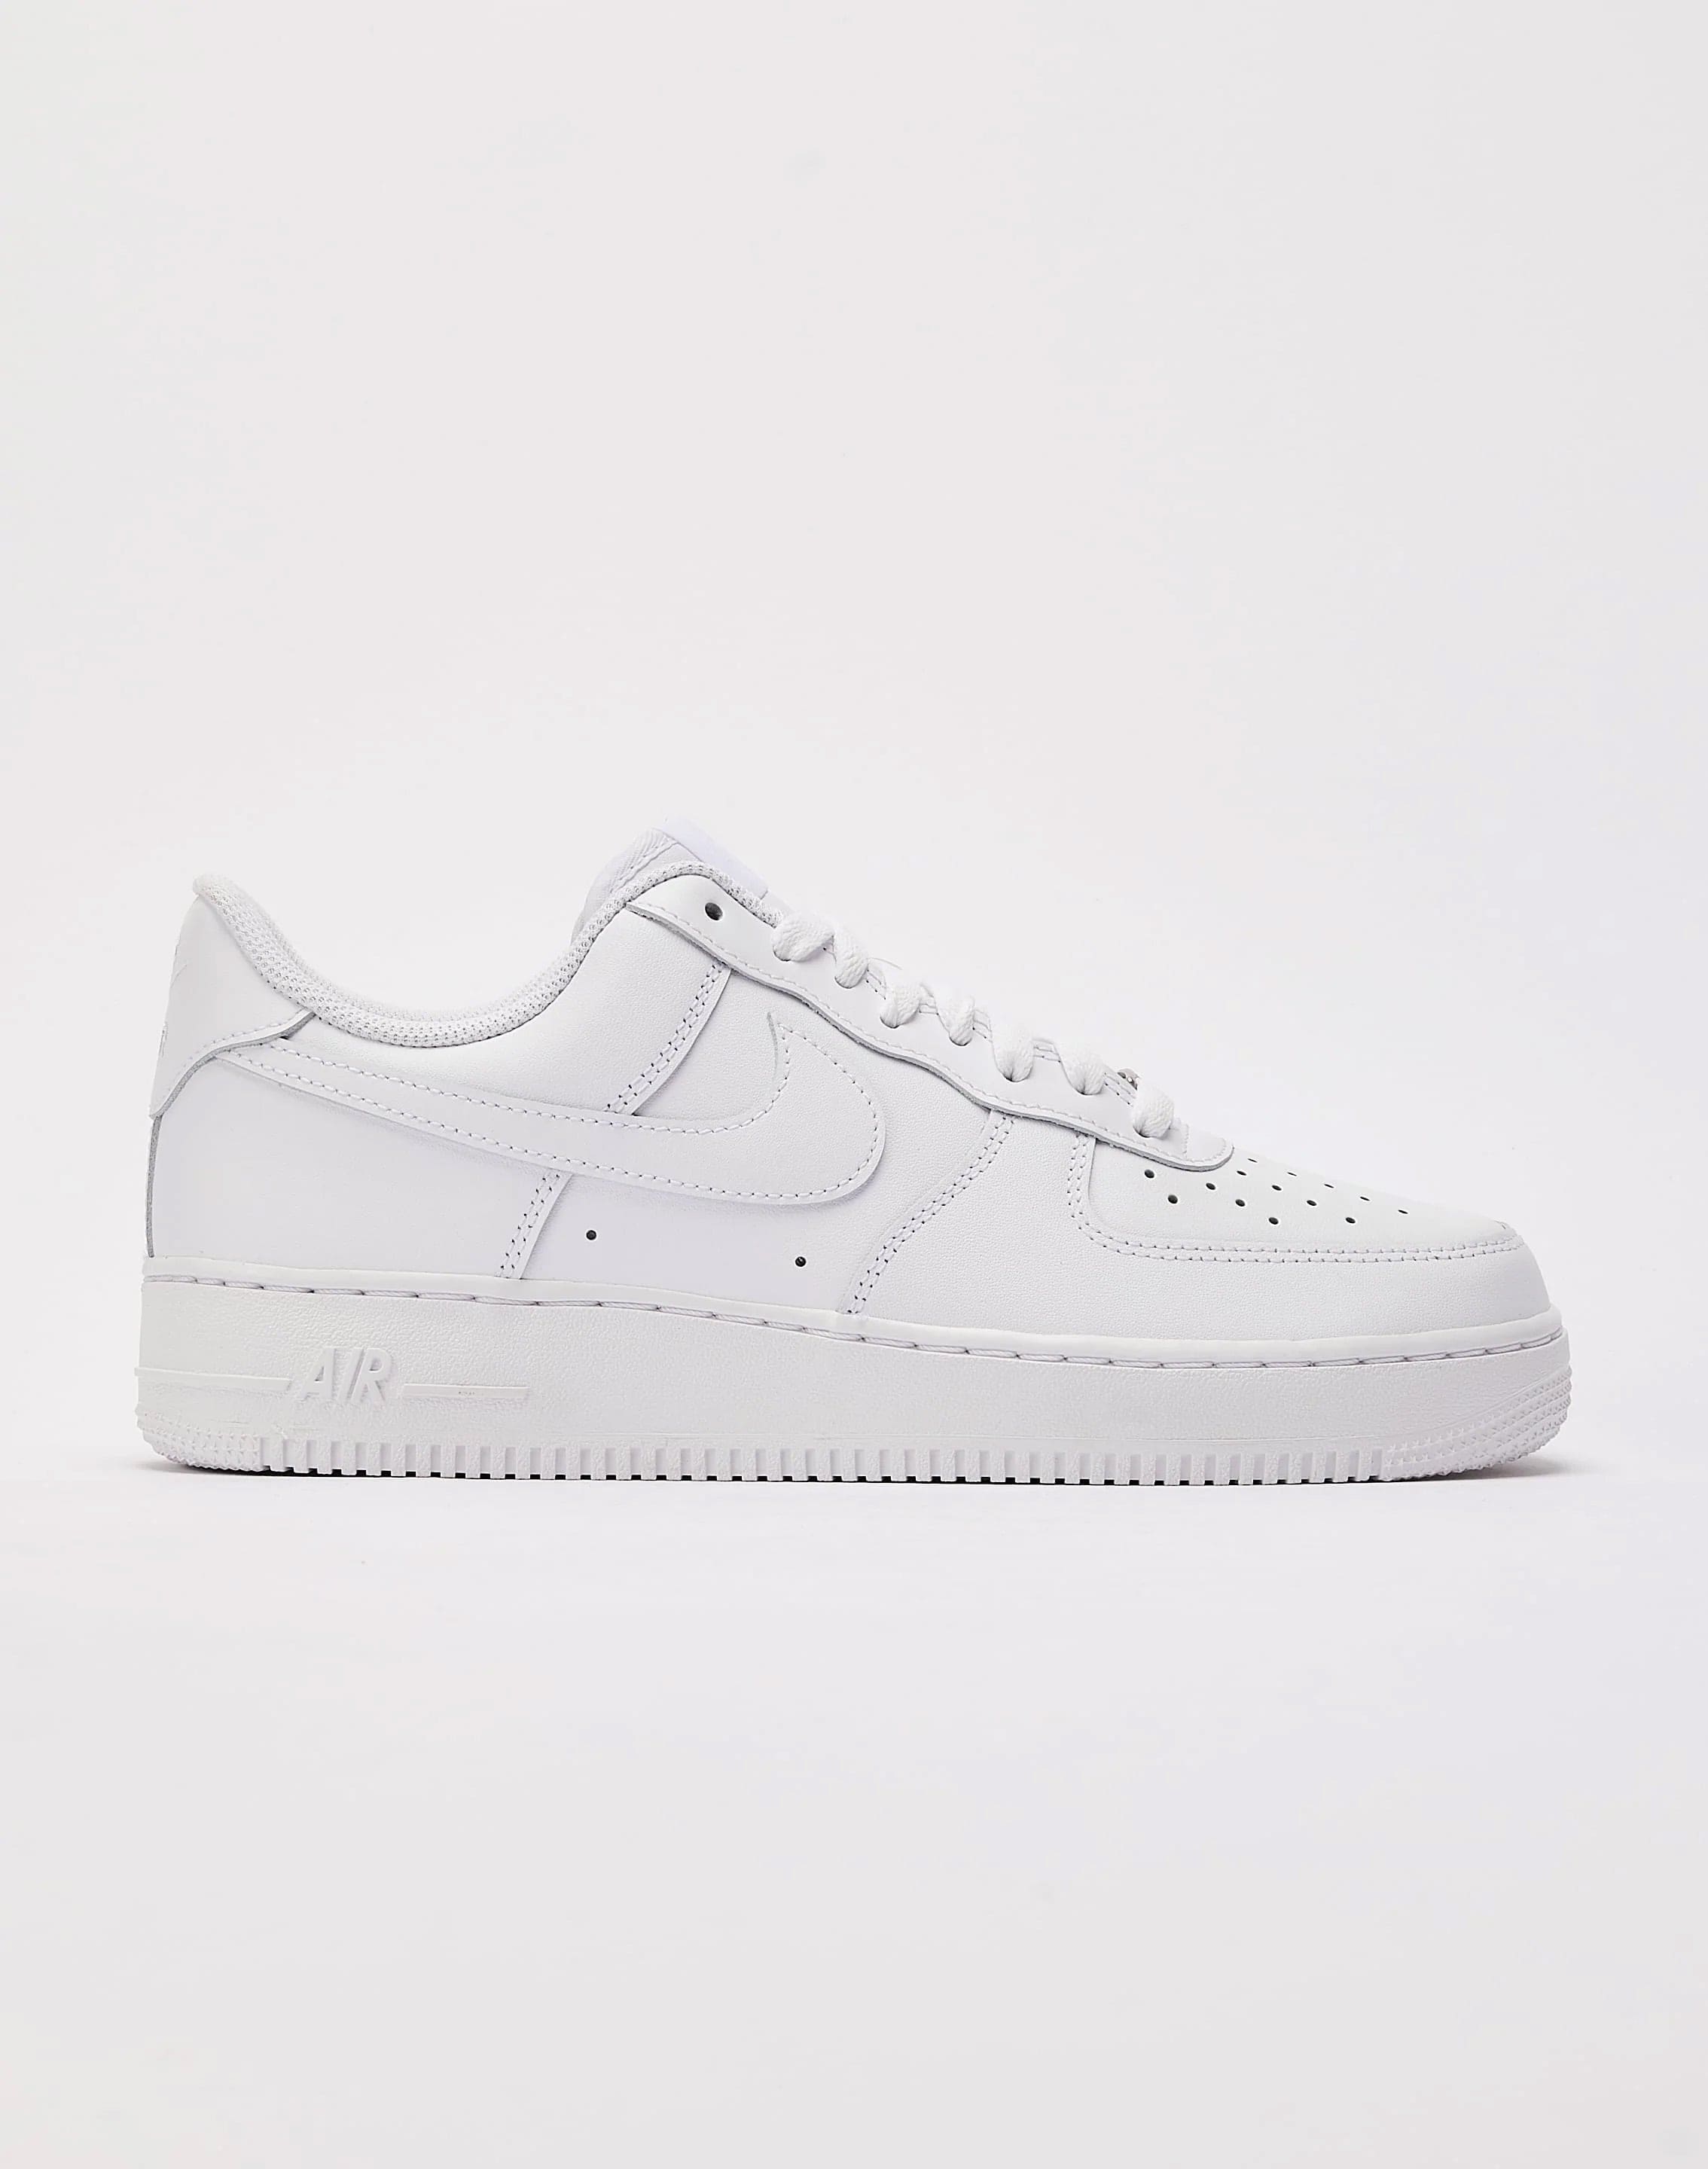 Pair Of High-top Classic Nike AF-1 Air Force 1 White Leather